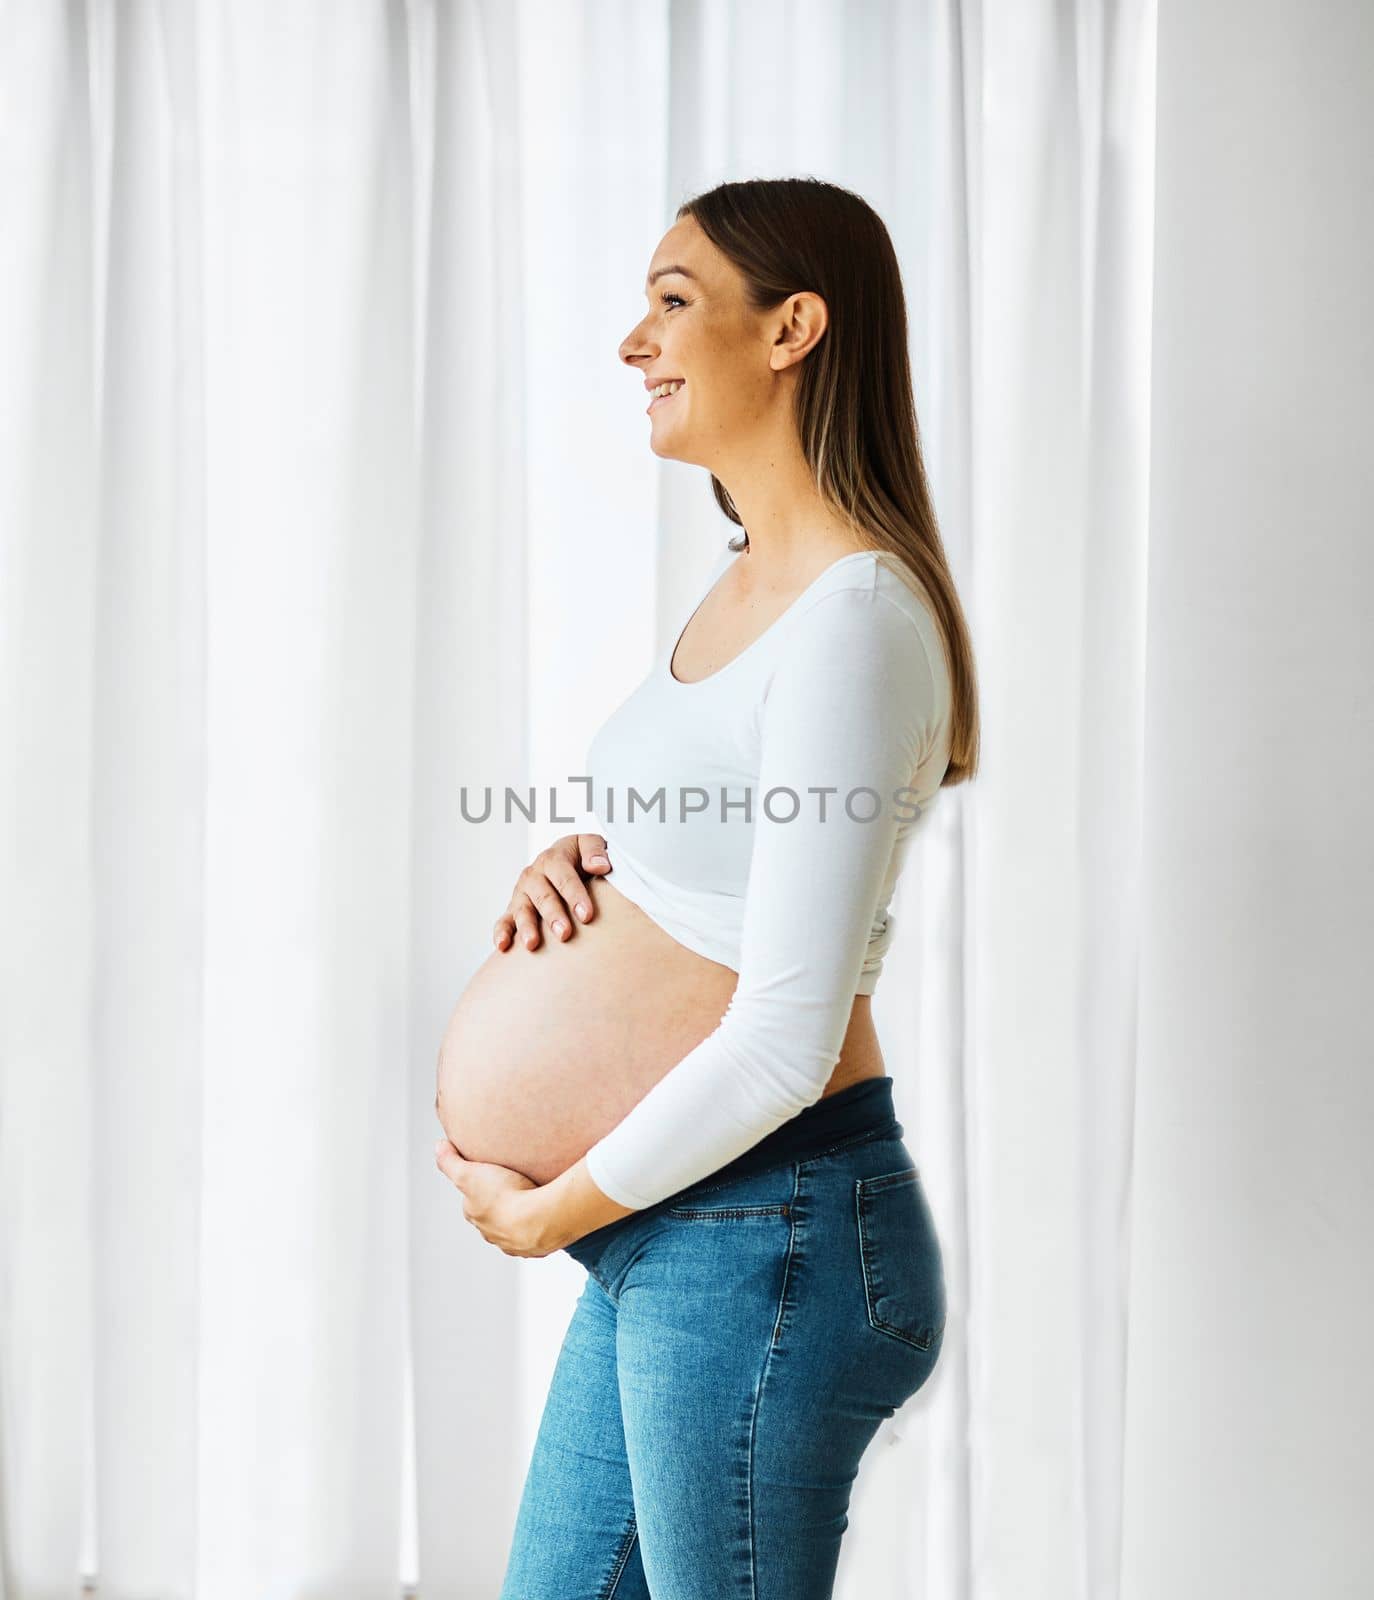 pregnant woman portrait mother female pregnancy belly young beautiful maternity posing abdomen happy girl expecting motherhood happiness by Picsfive